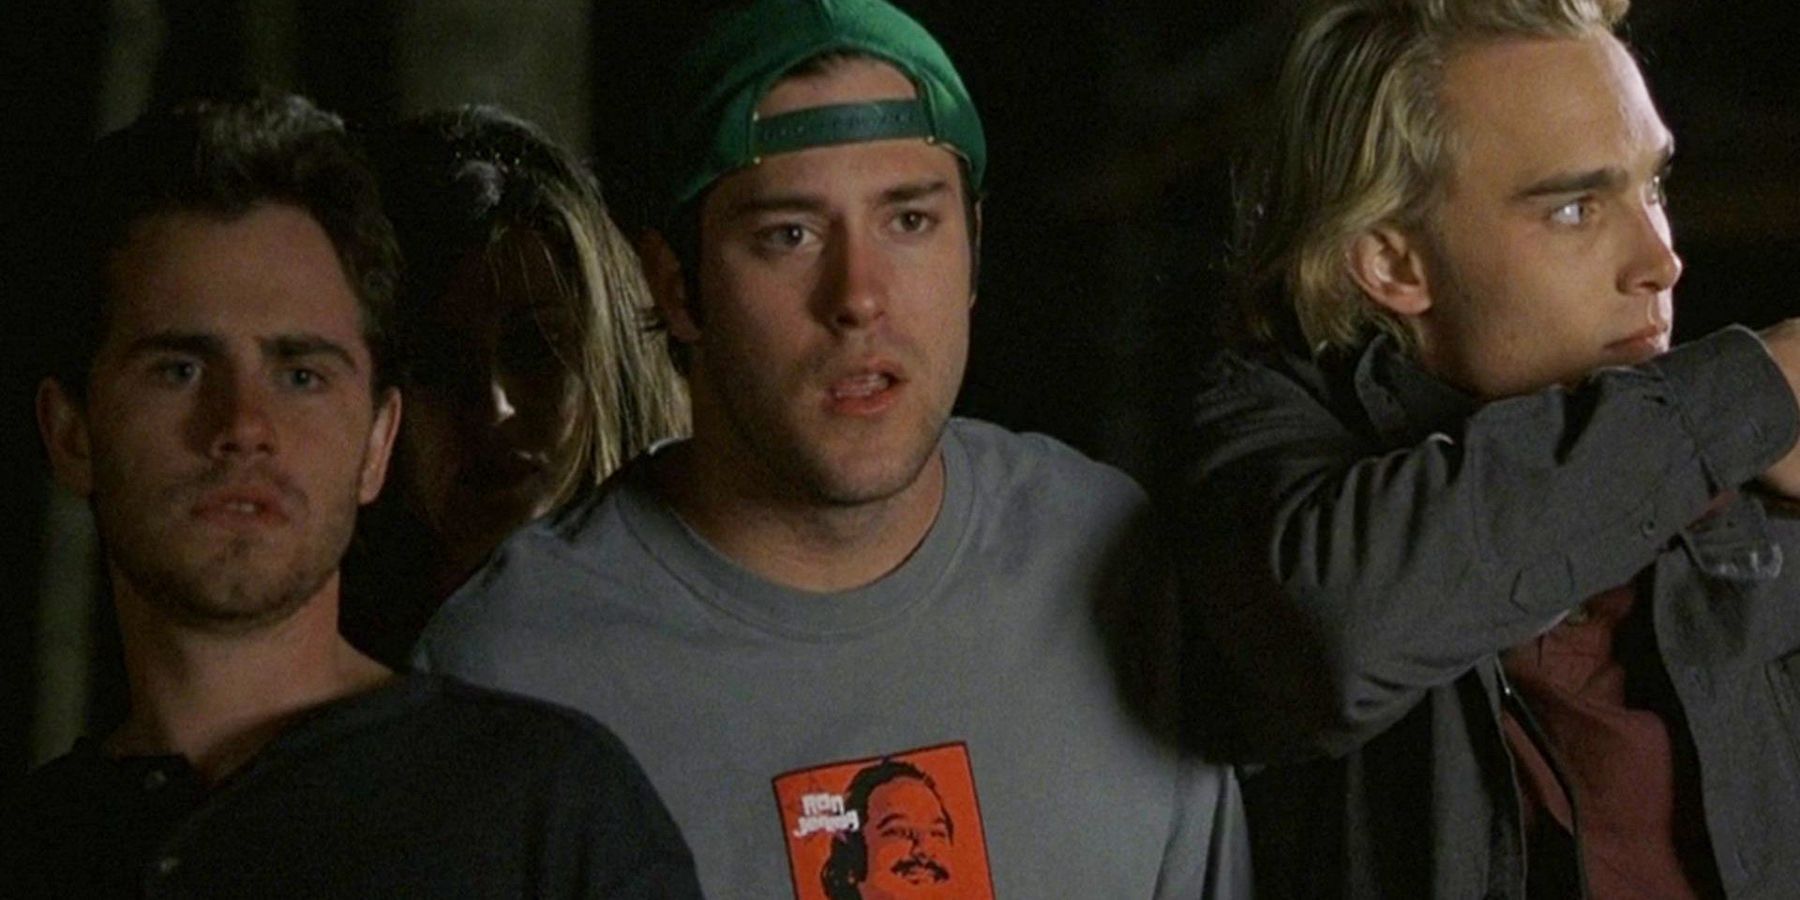 Paul, Bert, and Jeff in the 2002 horror movie Cabin Fever.